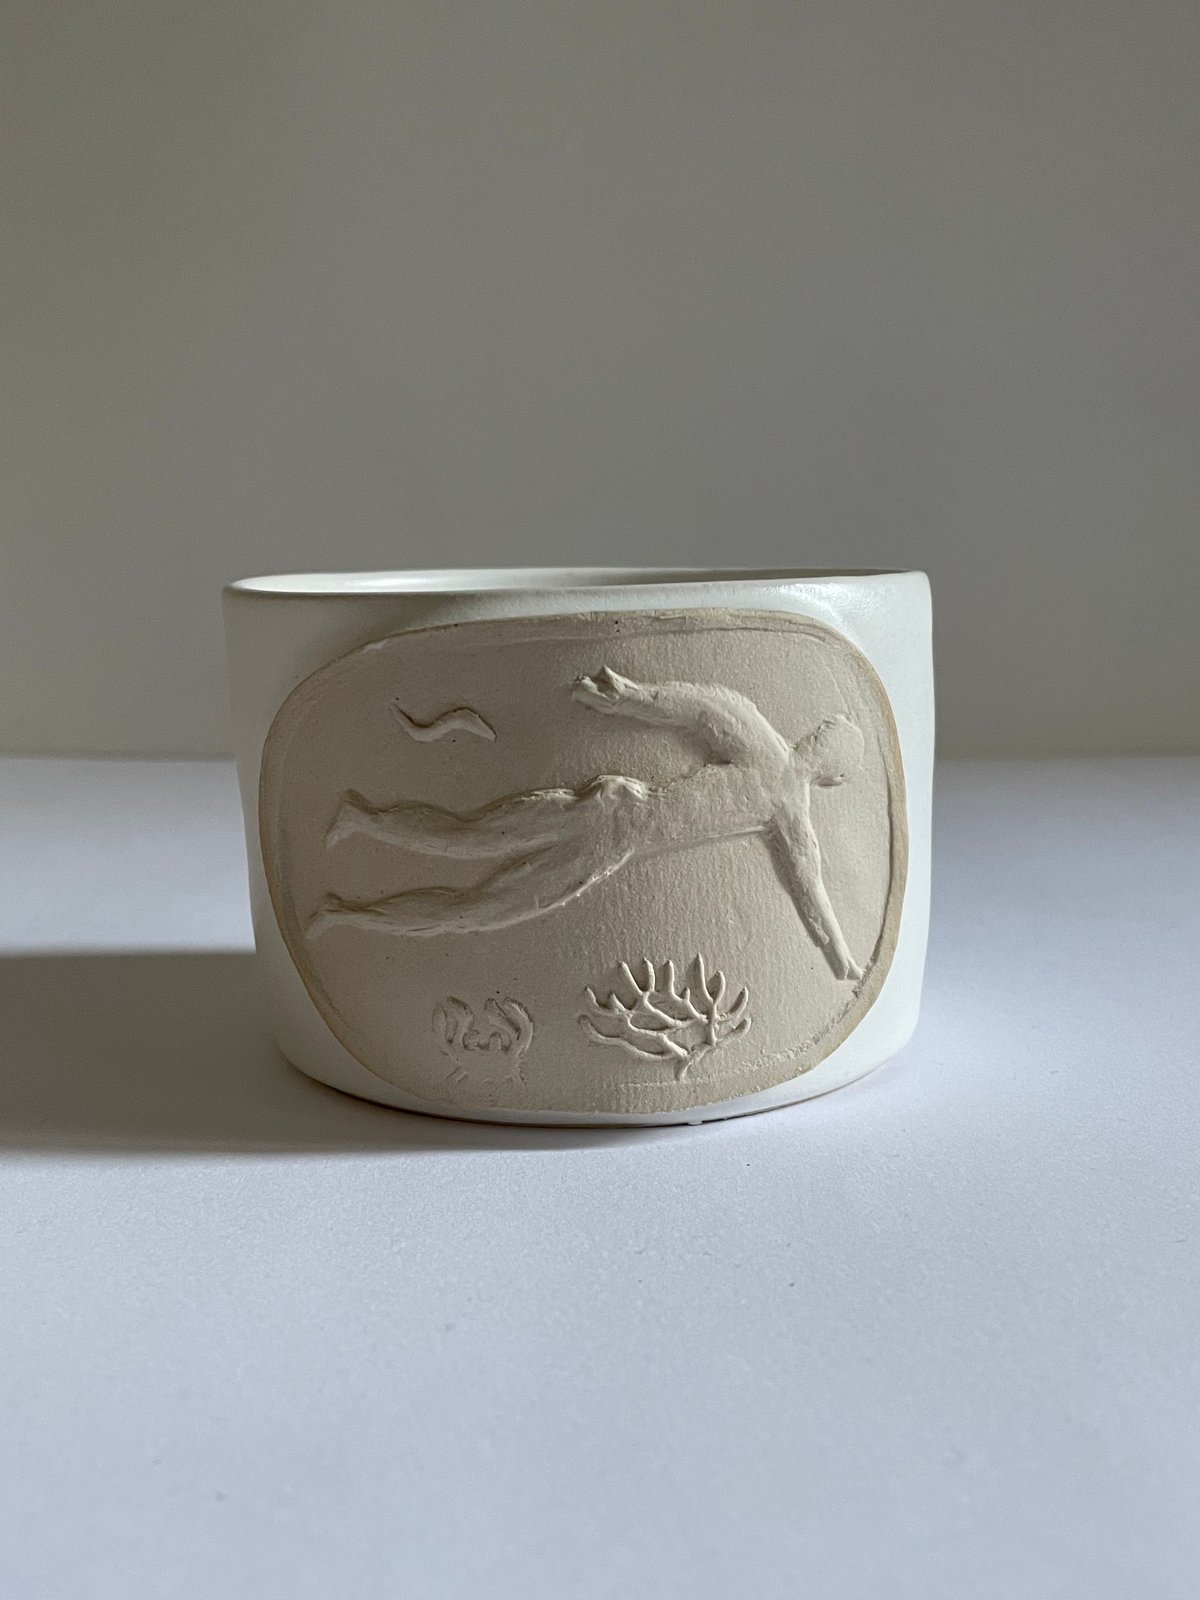 Seconds - Swimmers Stamp Pot #1